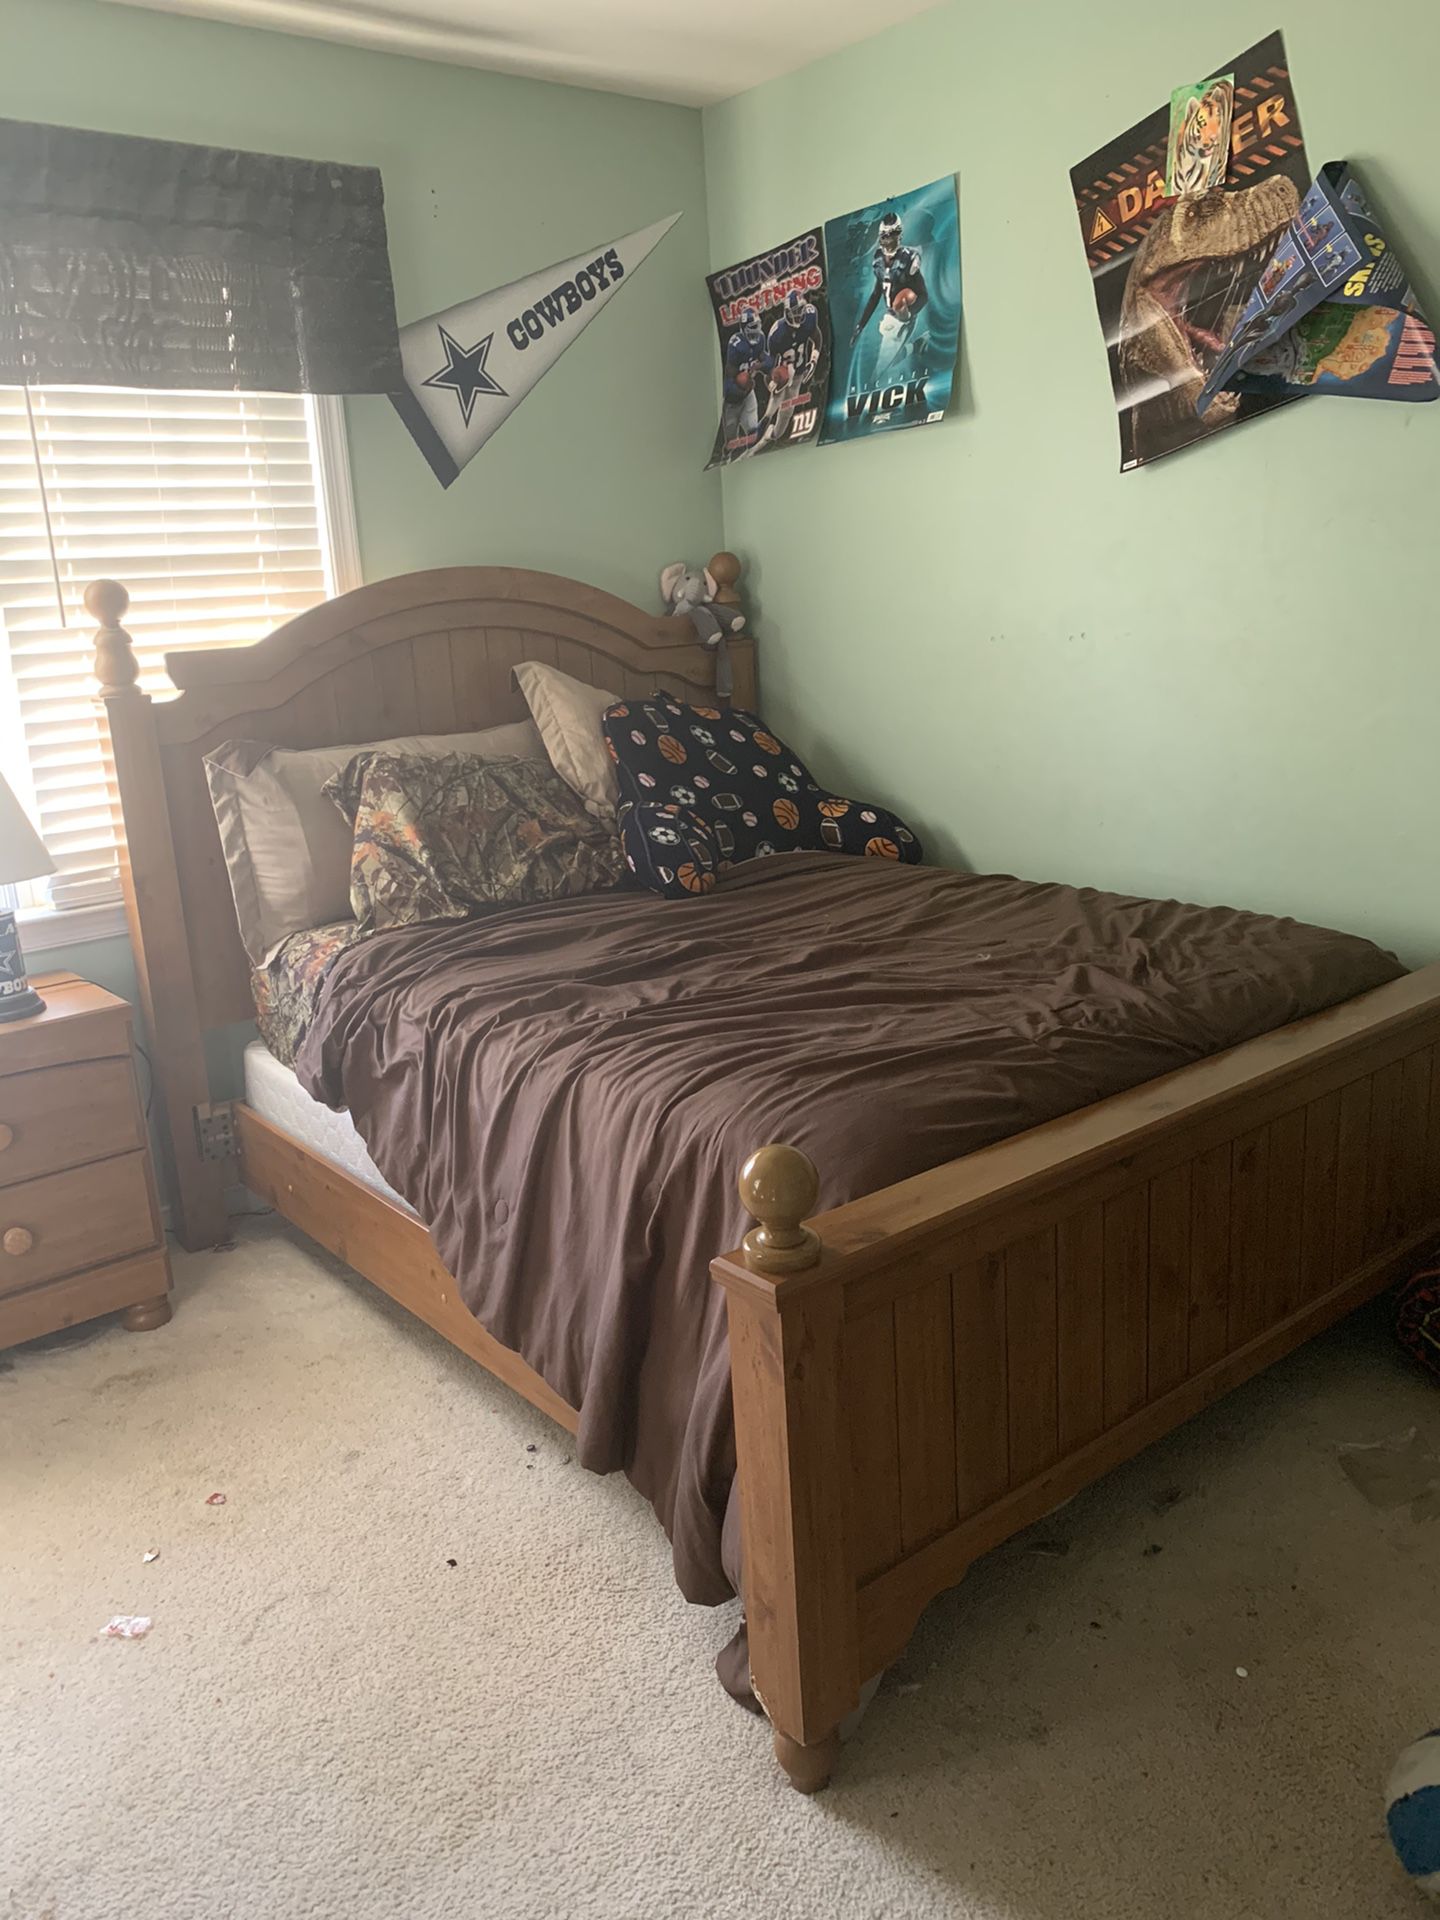 Full size Bedroom set ( mattress and box spring not included)